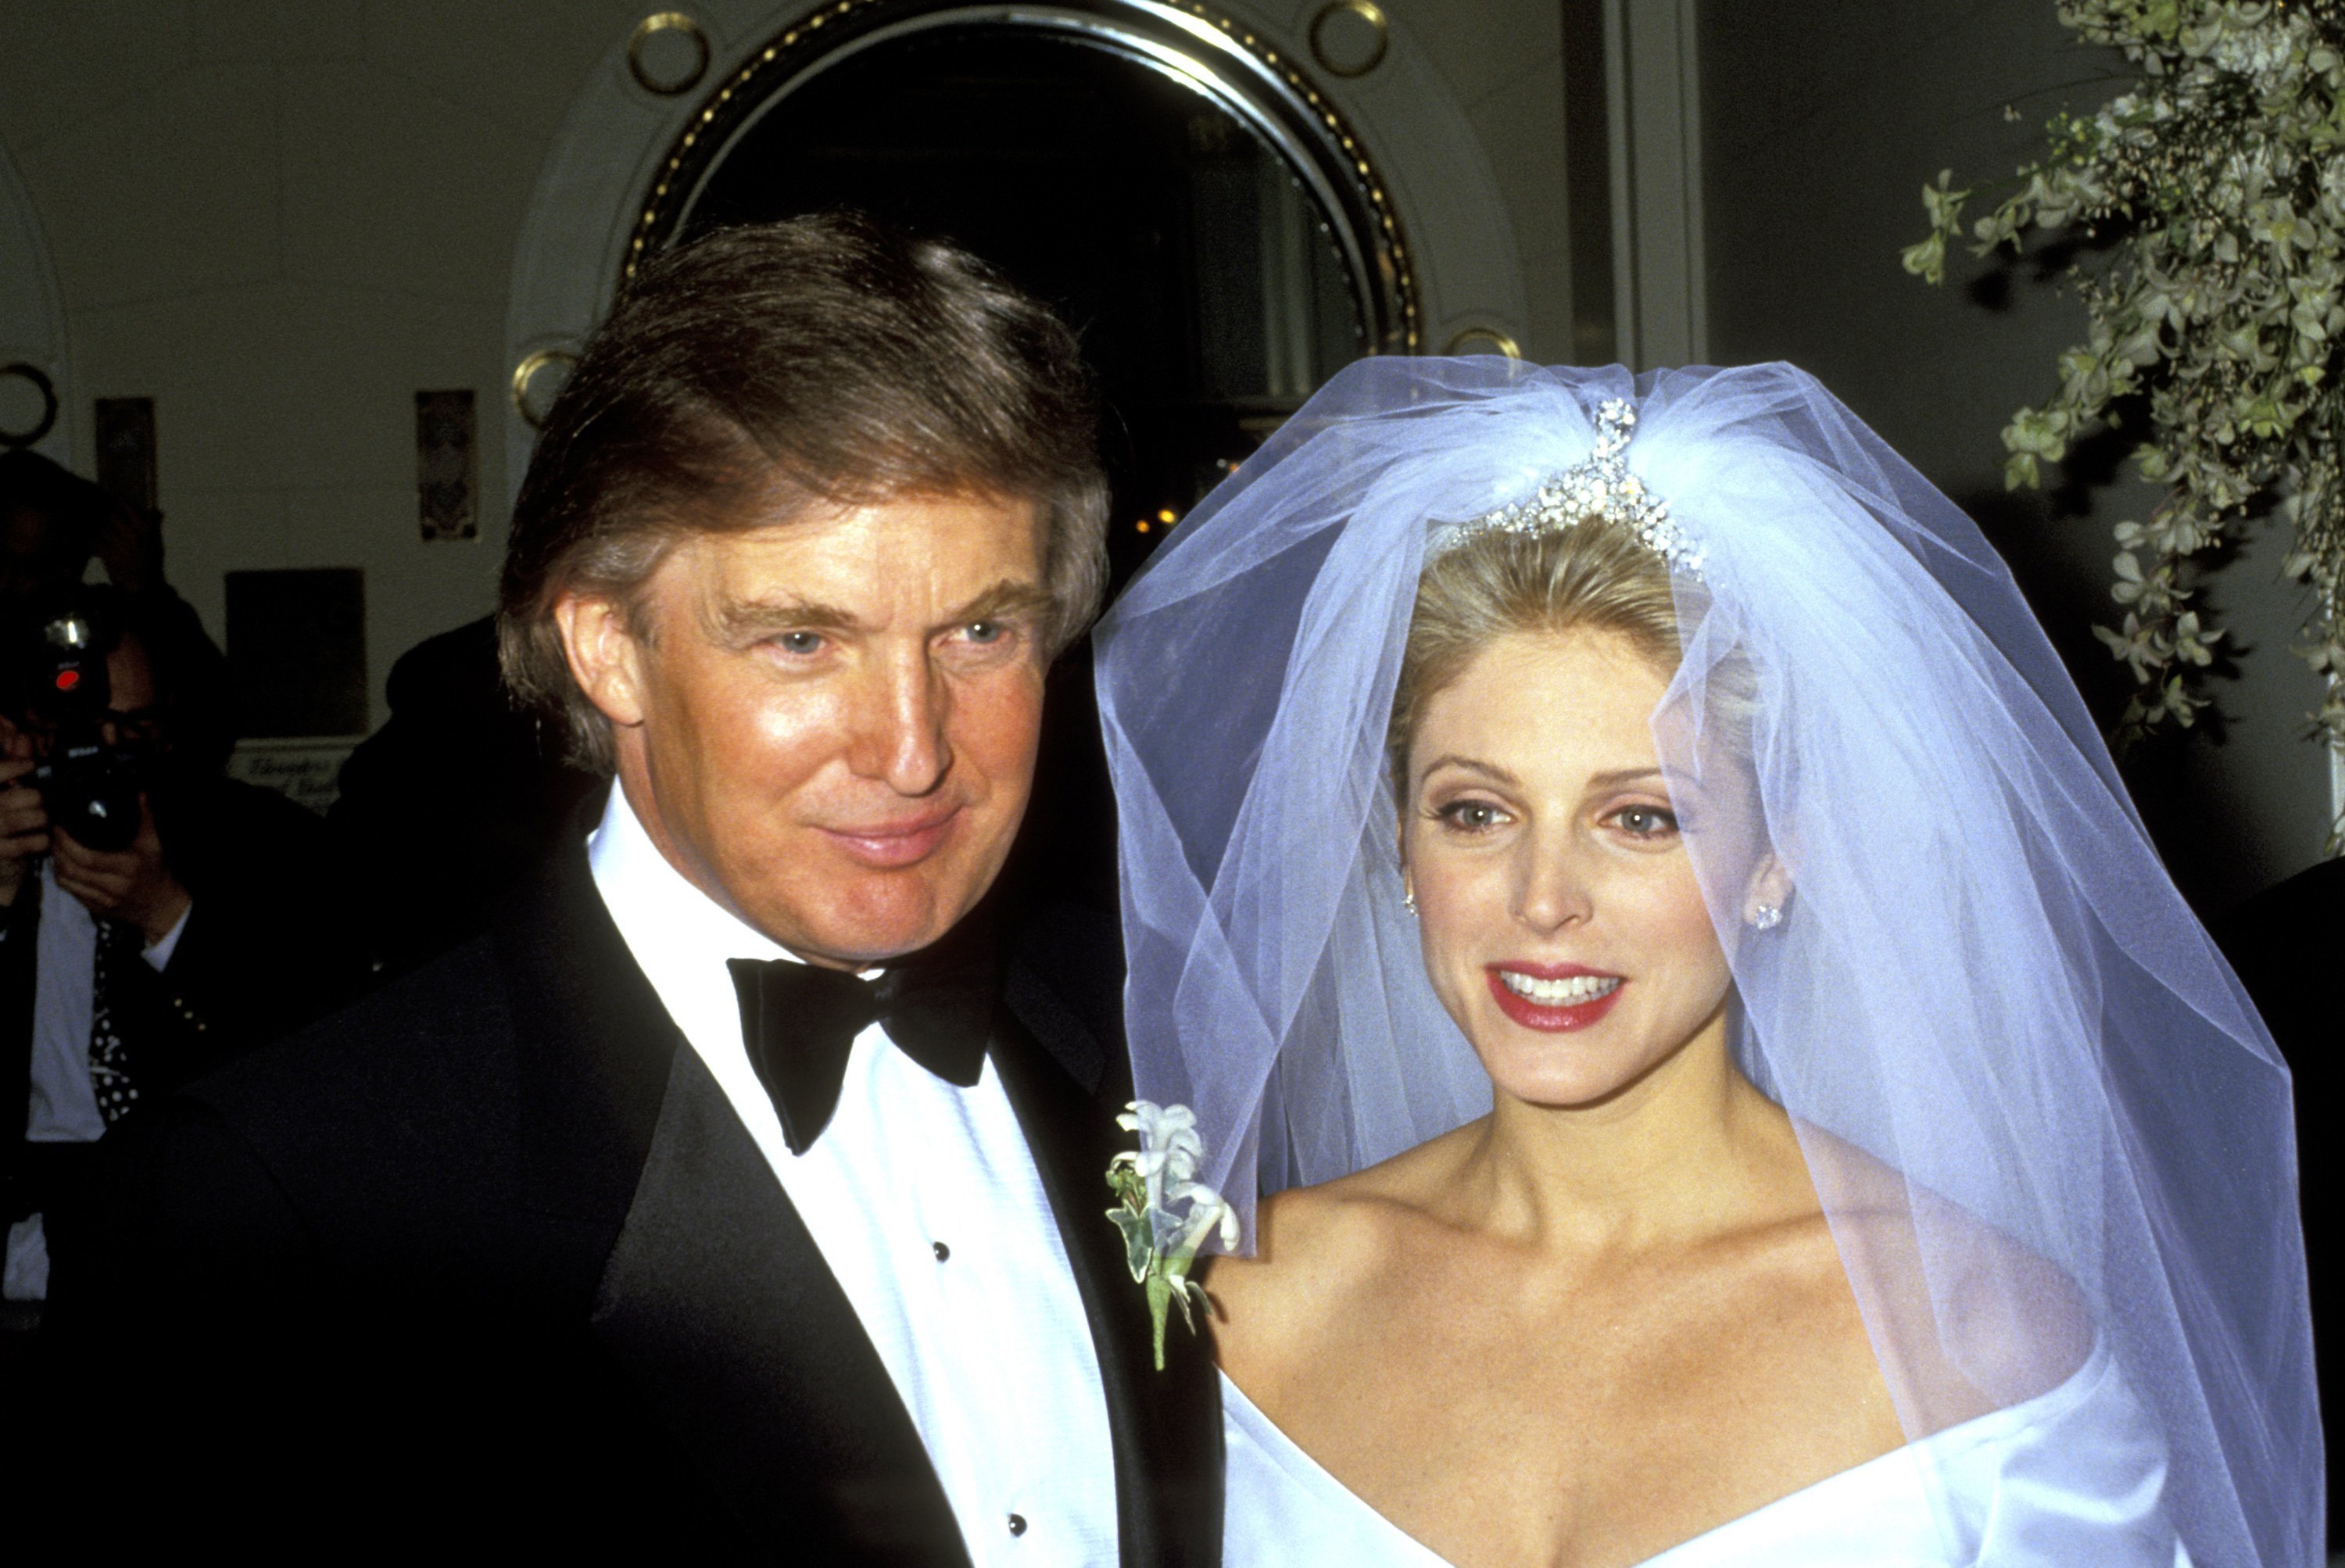 Donald Trump and Marla Maples during their Wedding, December 20, 1993 | Photo: GettyImages